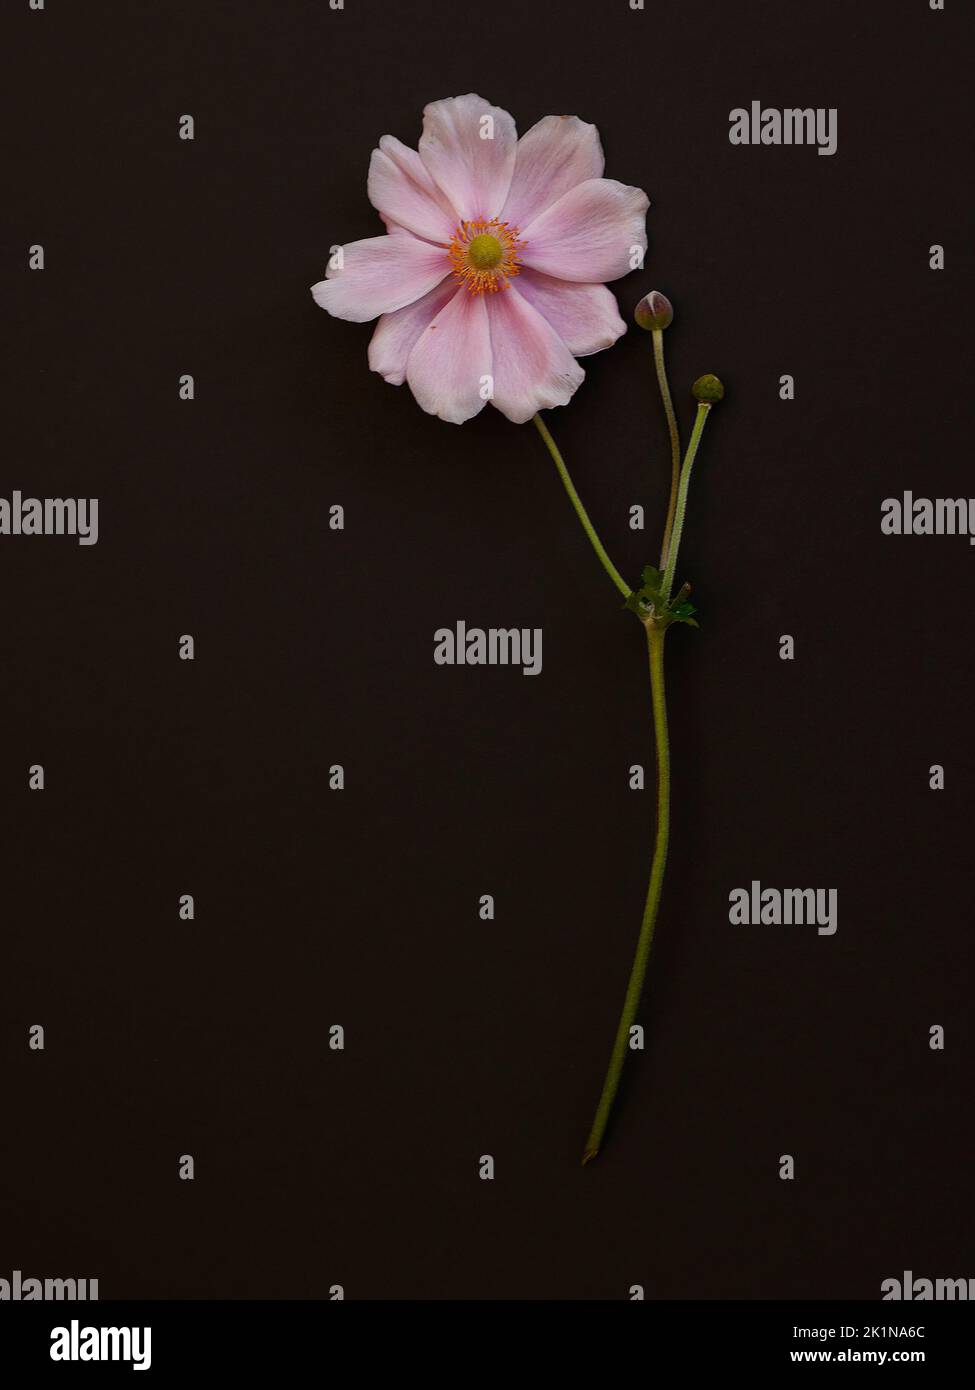 Close up of a botanic view of a pink flower and stem and flower buds of the herbaceous perennial  Anemone x hybrida seen against a dark background. Stock Photo